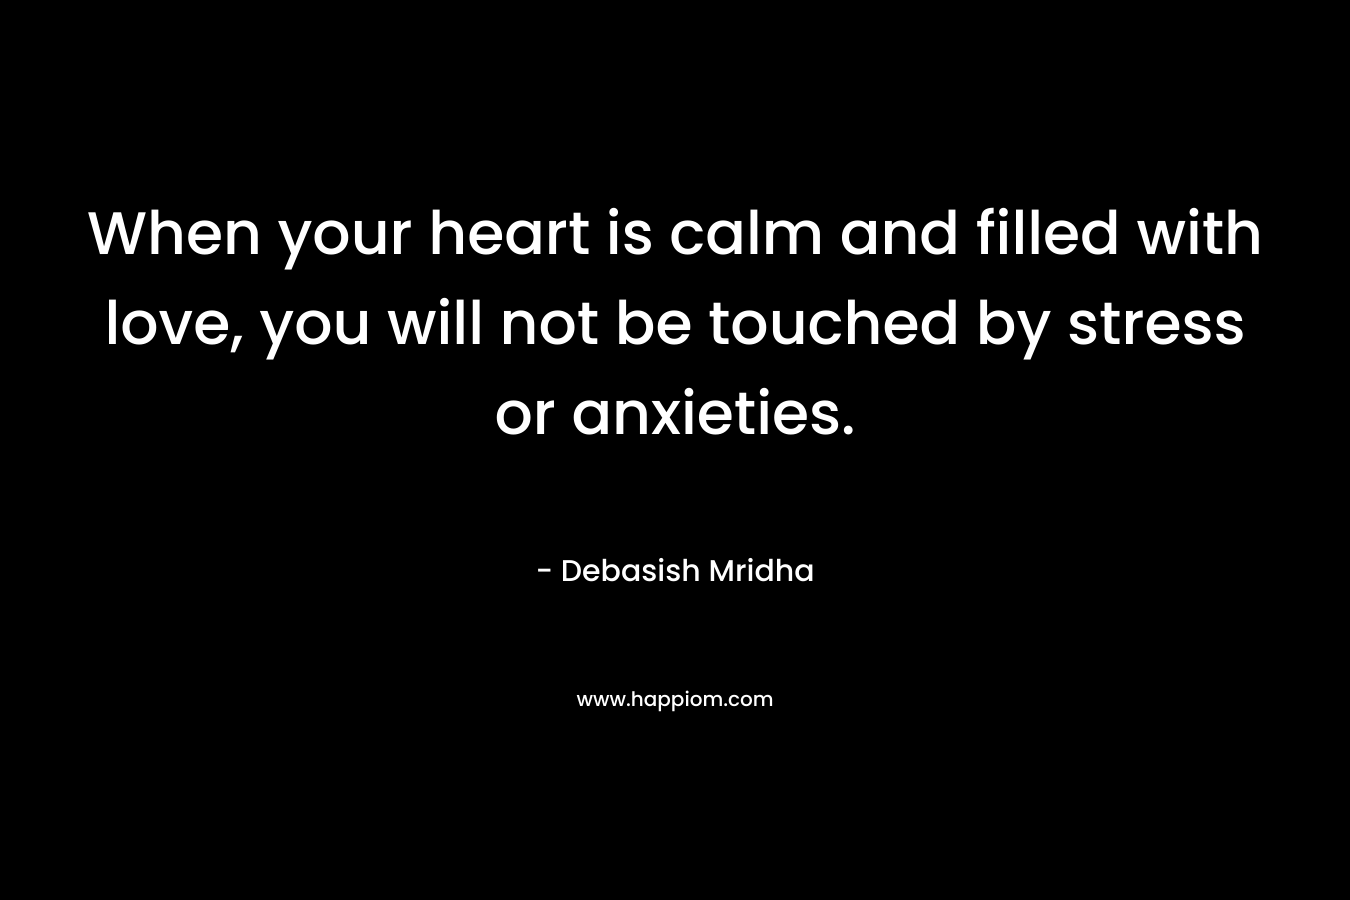 When your heart is calm and filled with love, you will not be touched by stress or anxieties.